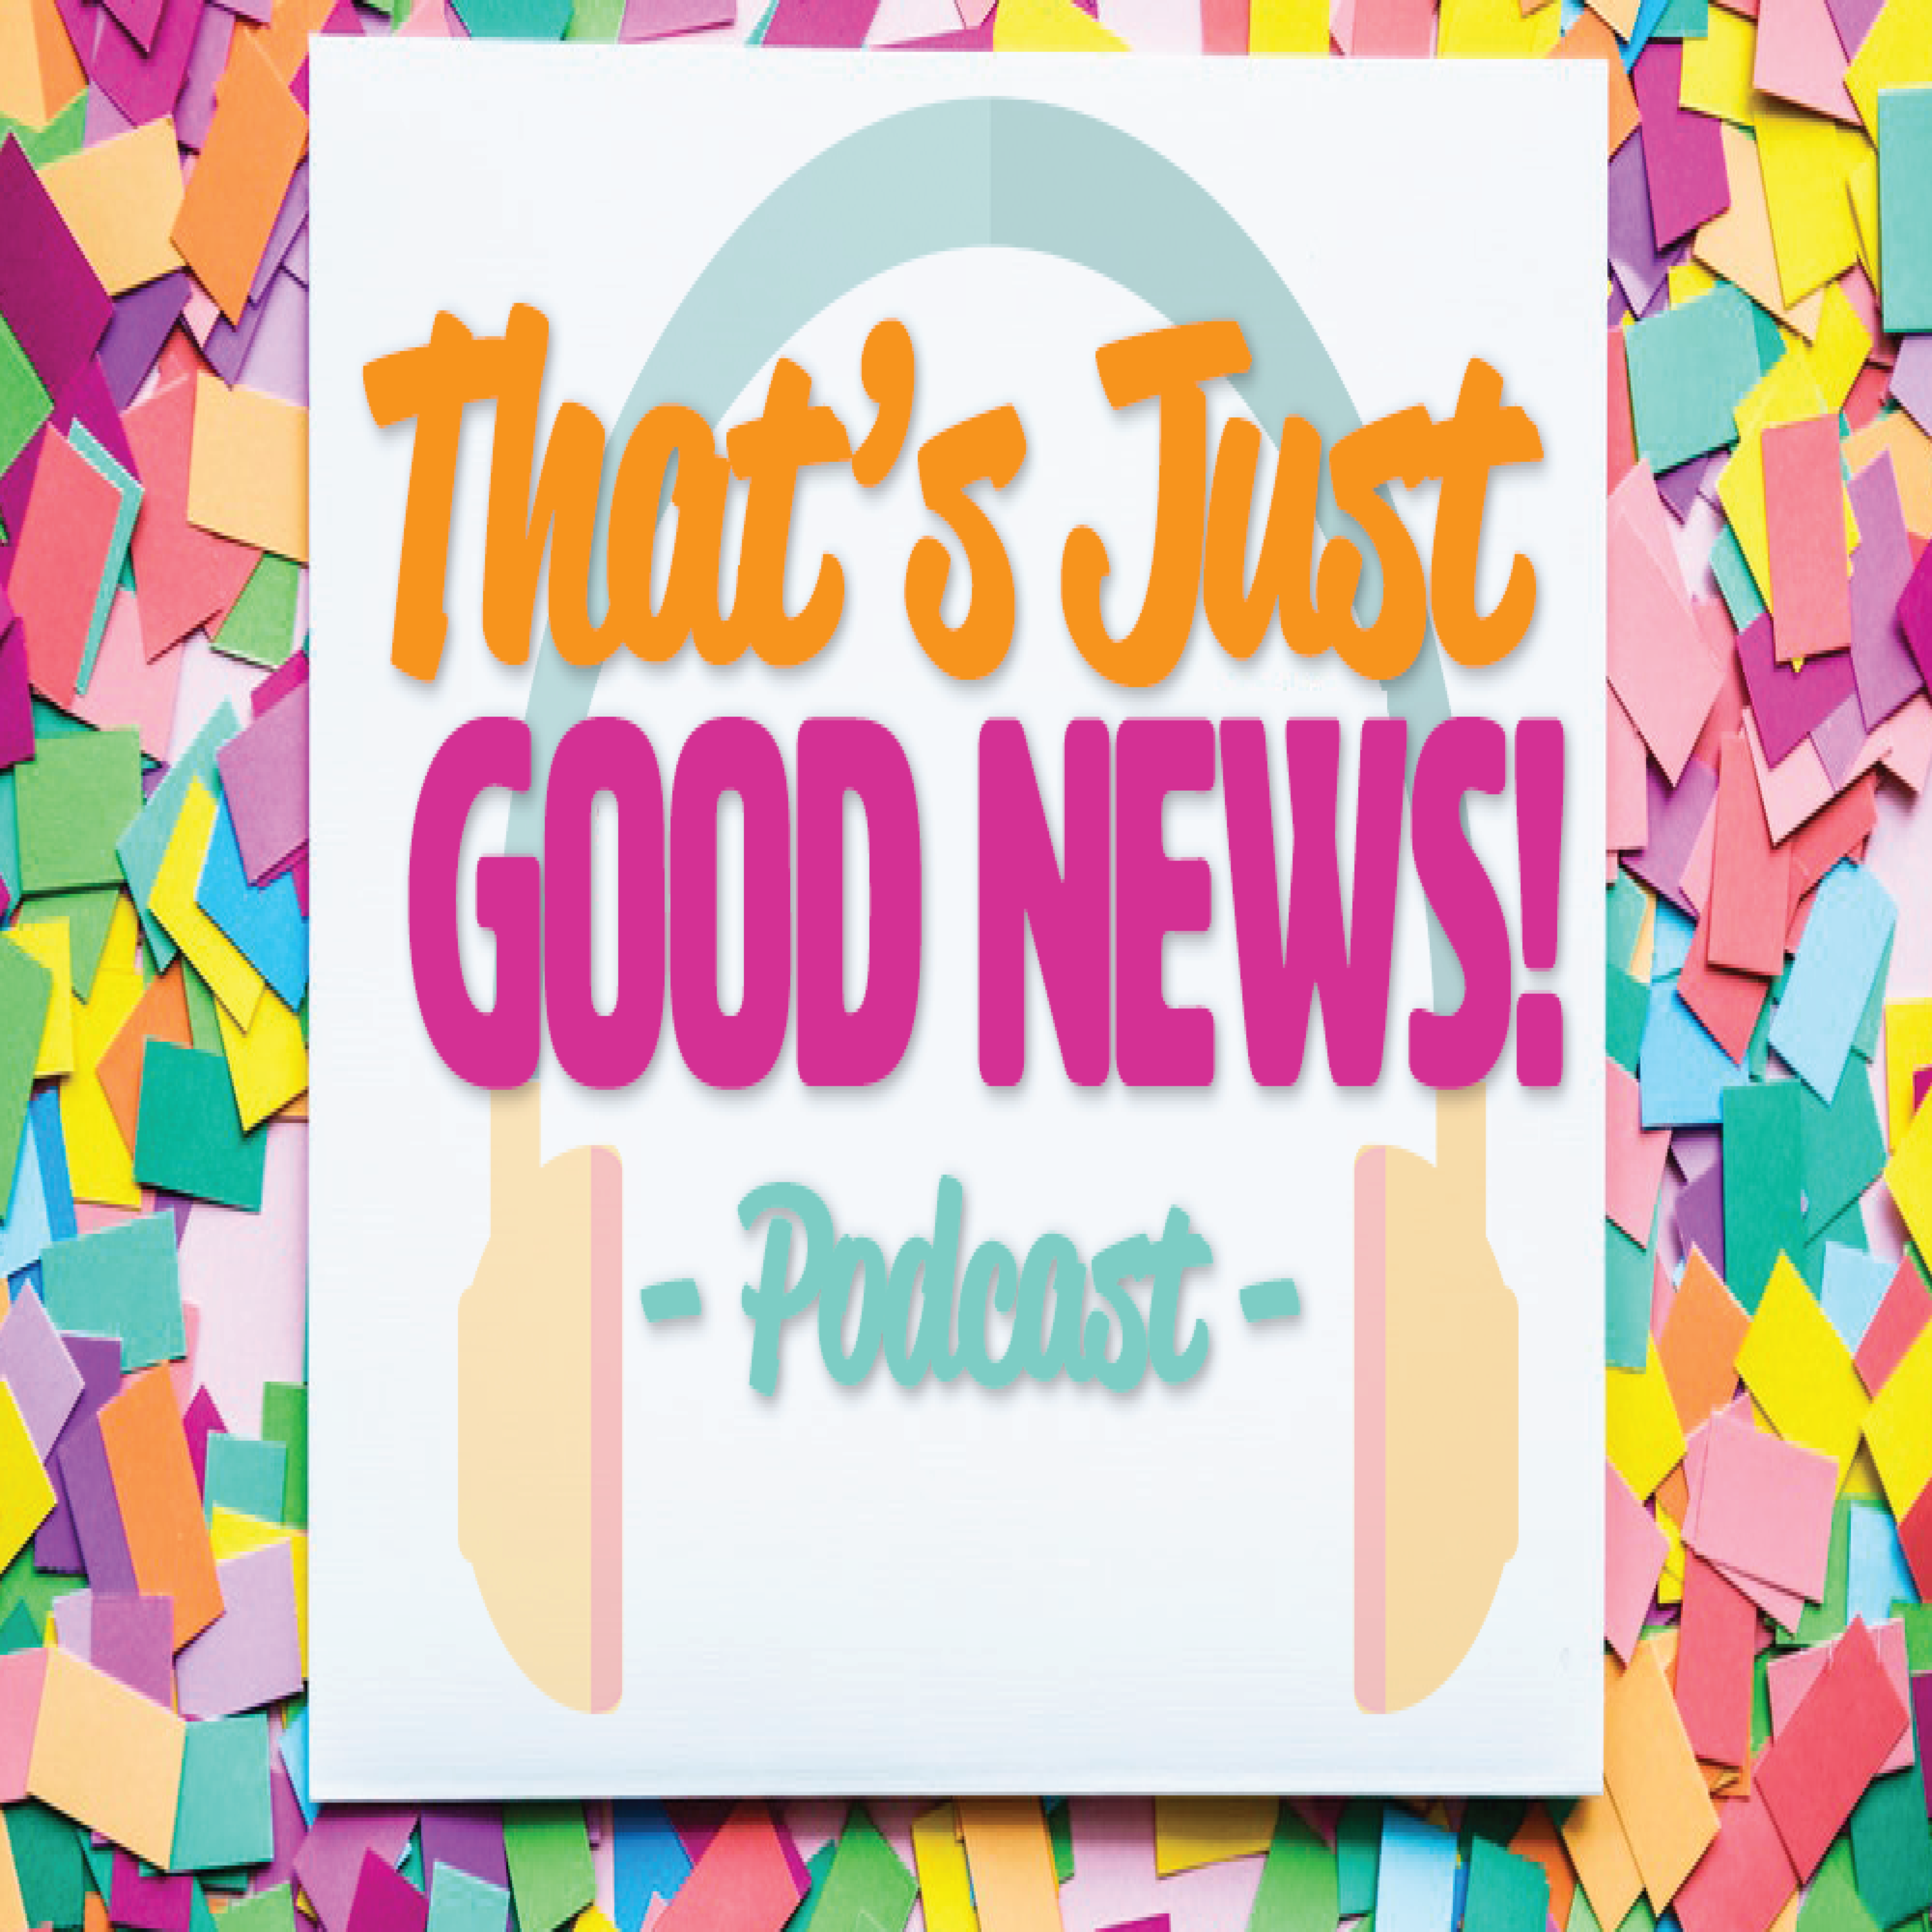 Planes, Trains and Automobiles? That's Just Good News! Podcast!